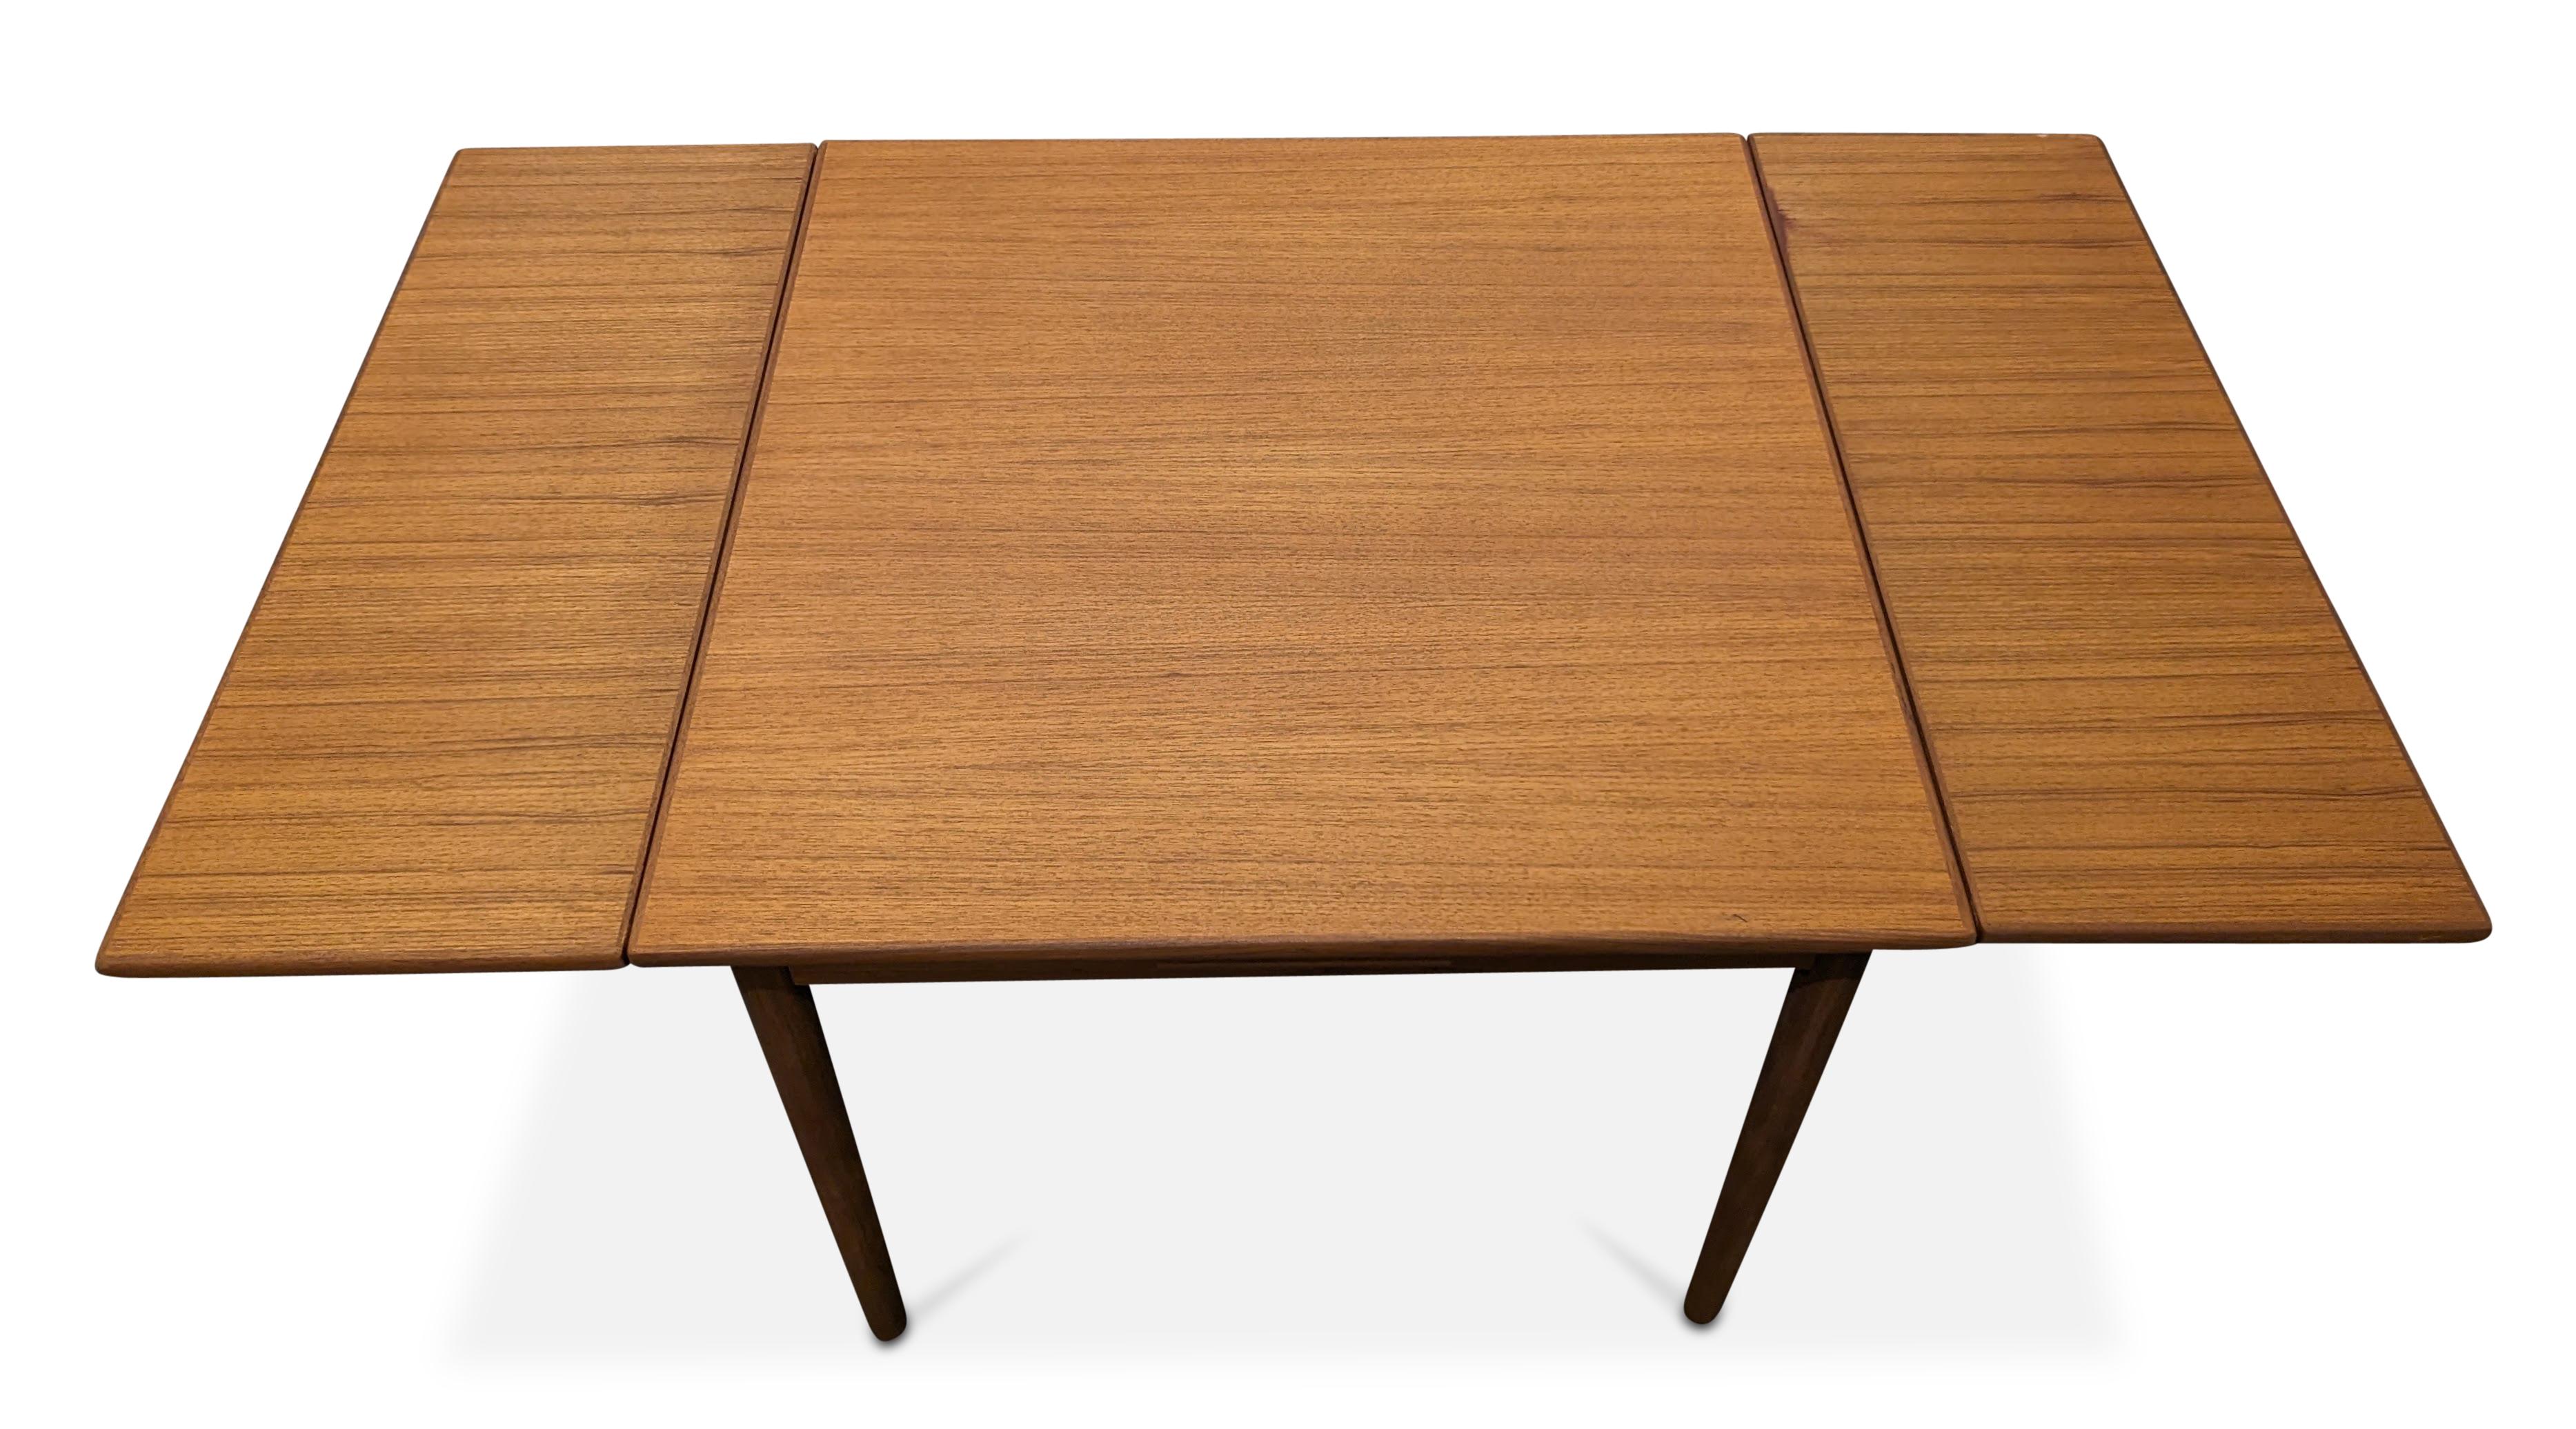 Vintage Danish Mid Century Square Dining Table w 2 Leaves - 082341 1